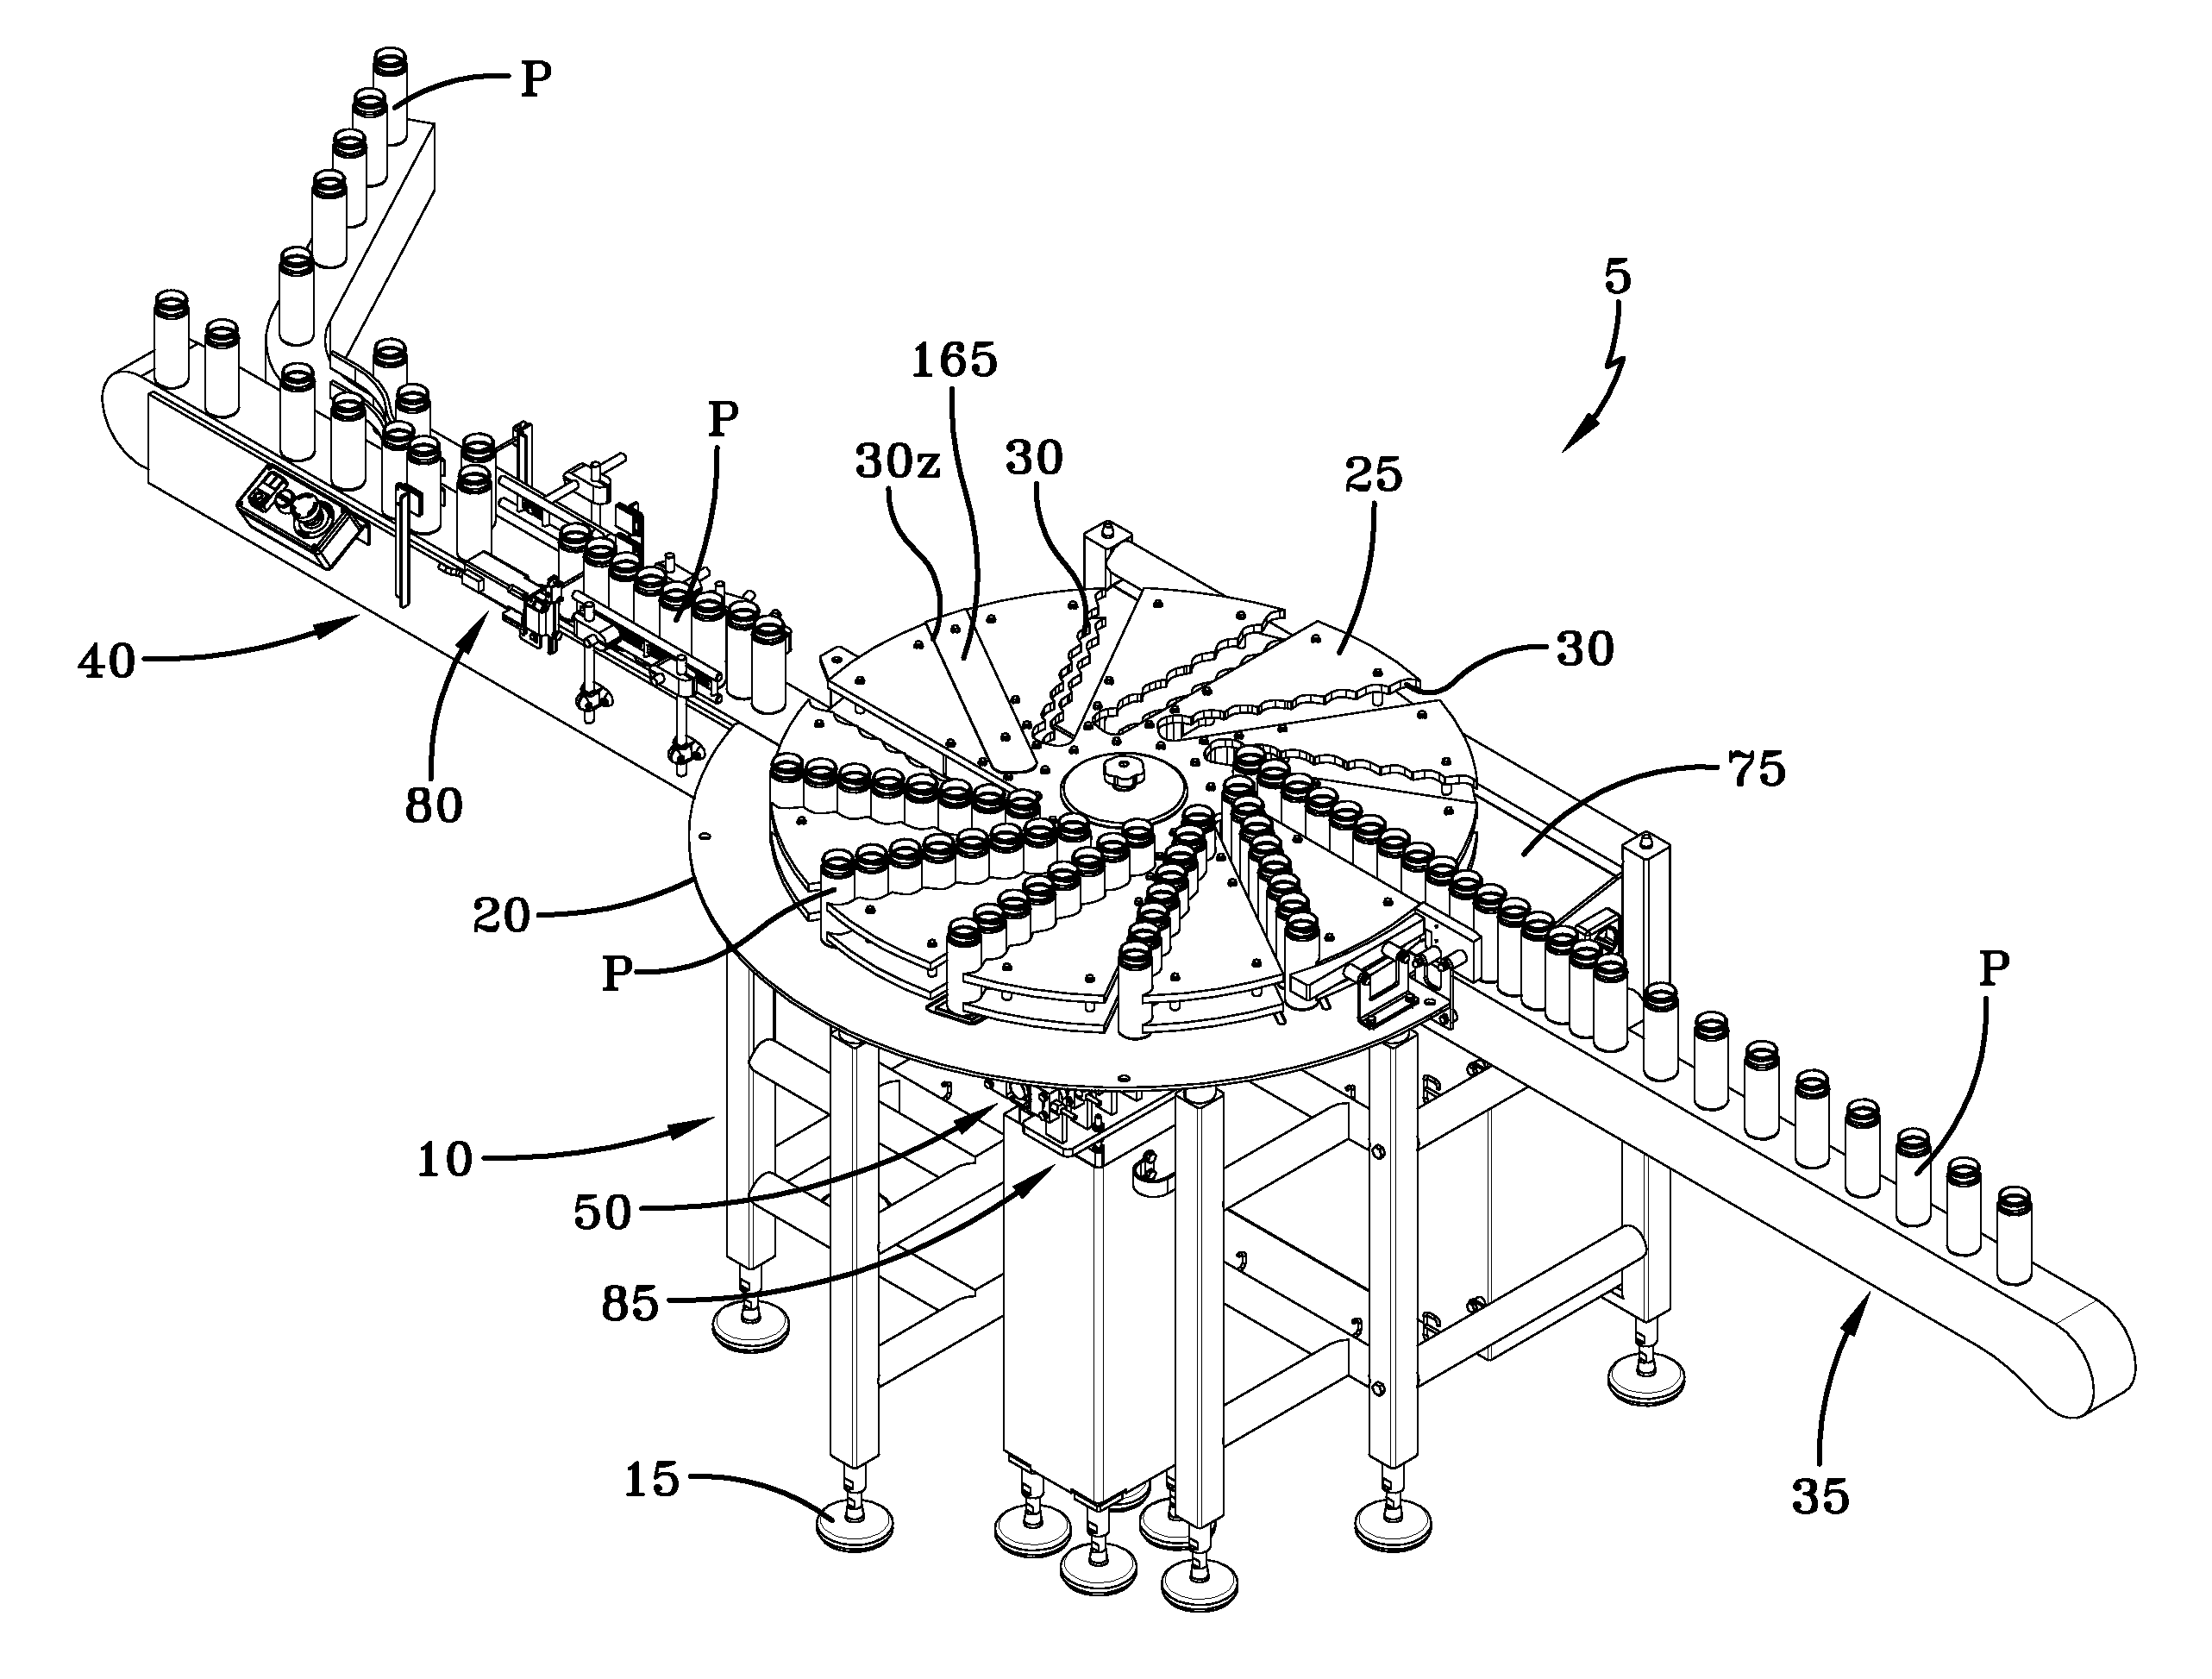 Intermittent motion checkweigher with offset product pockets